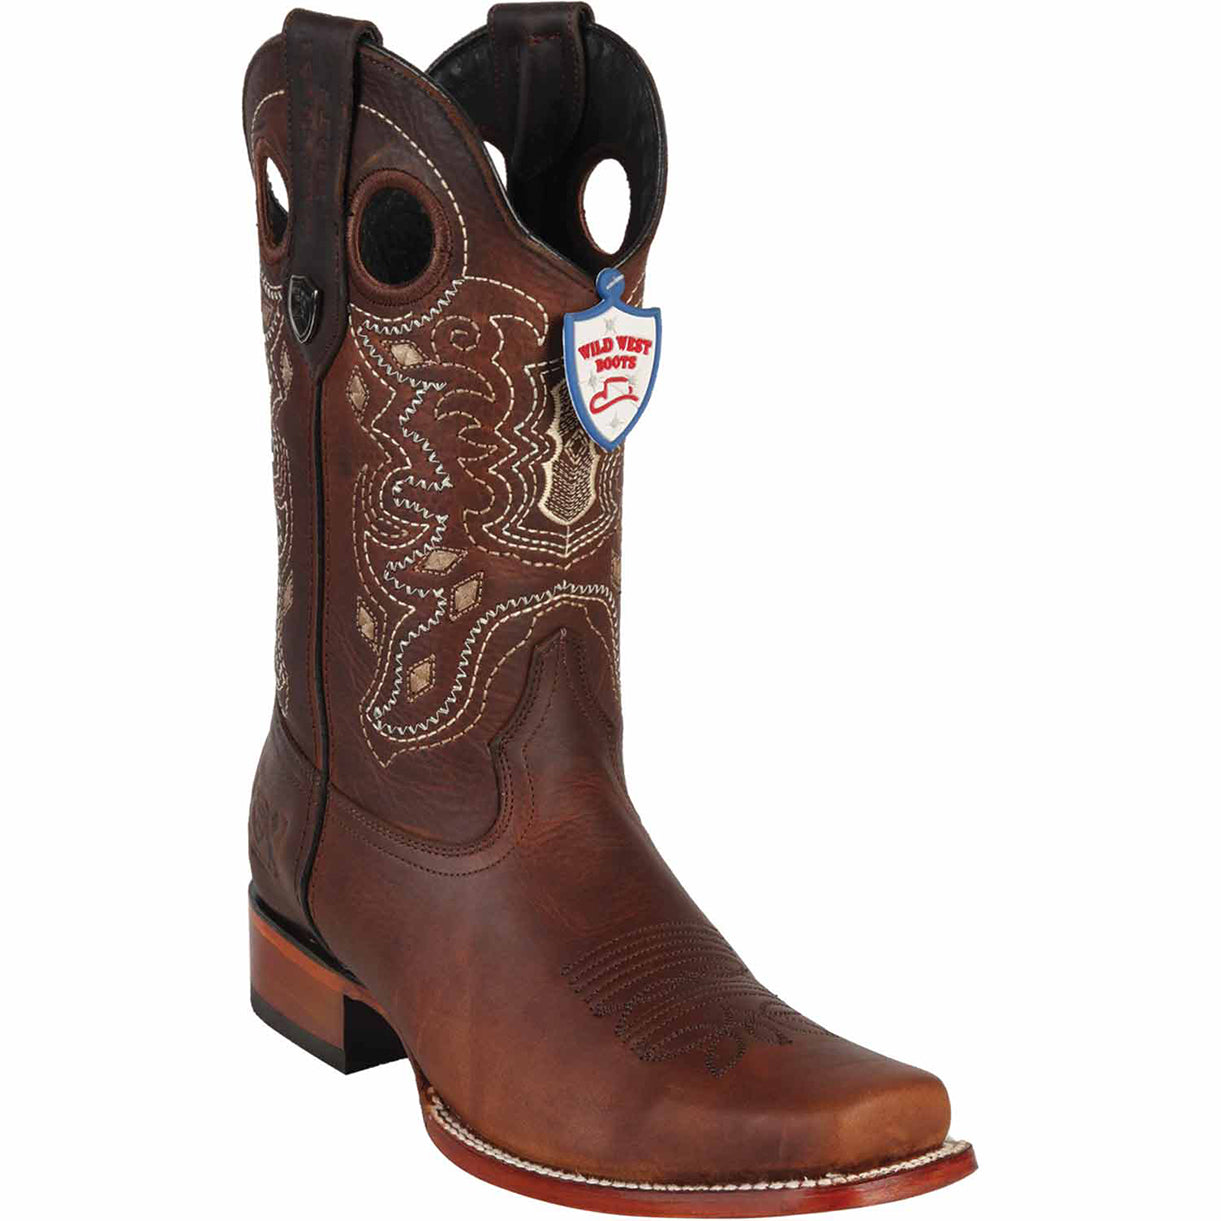 Brown Square Toe Cowboy Boots - 2